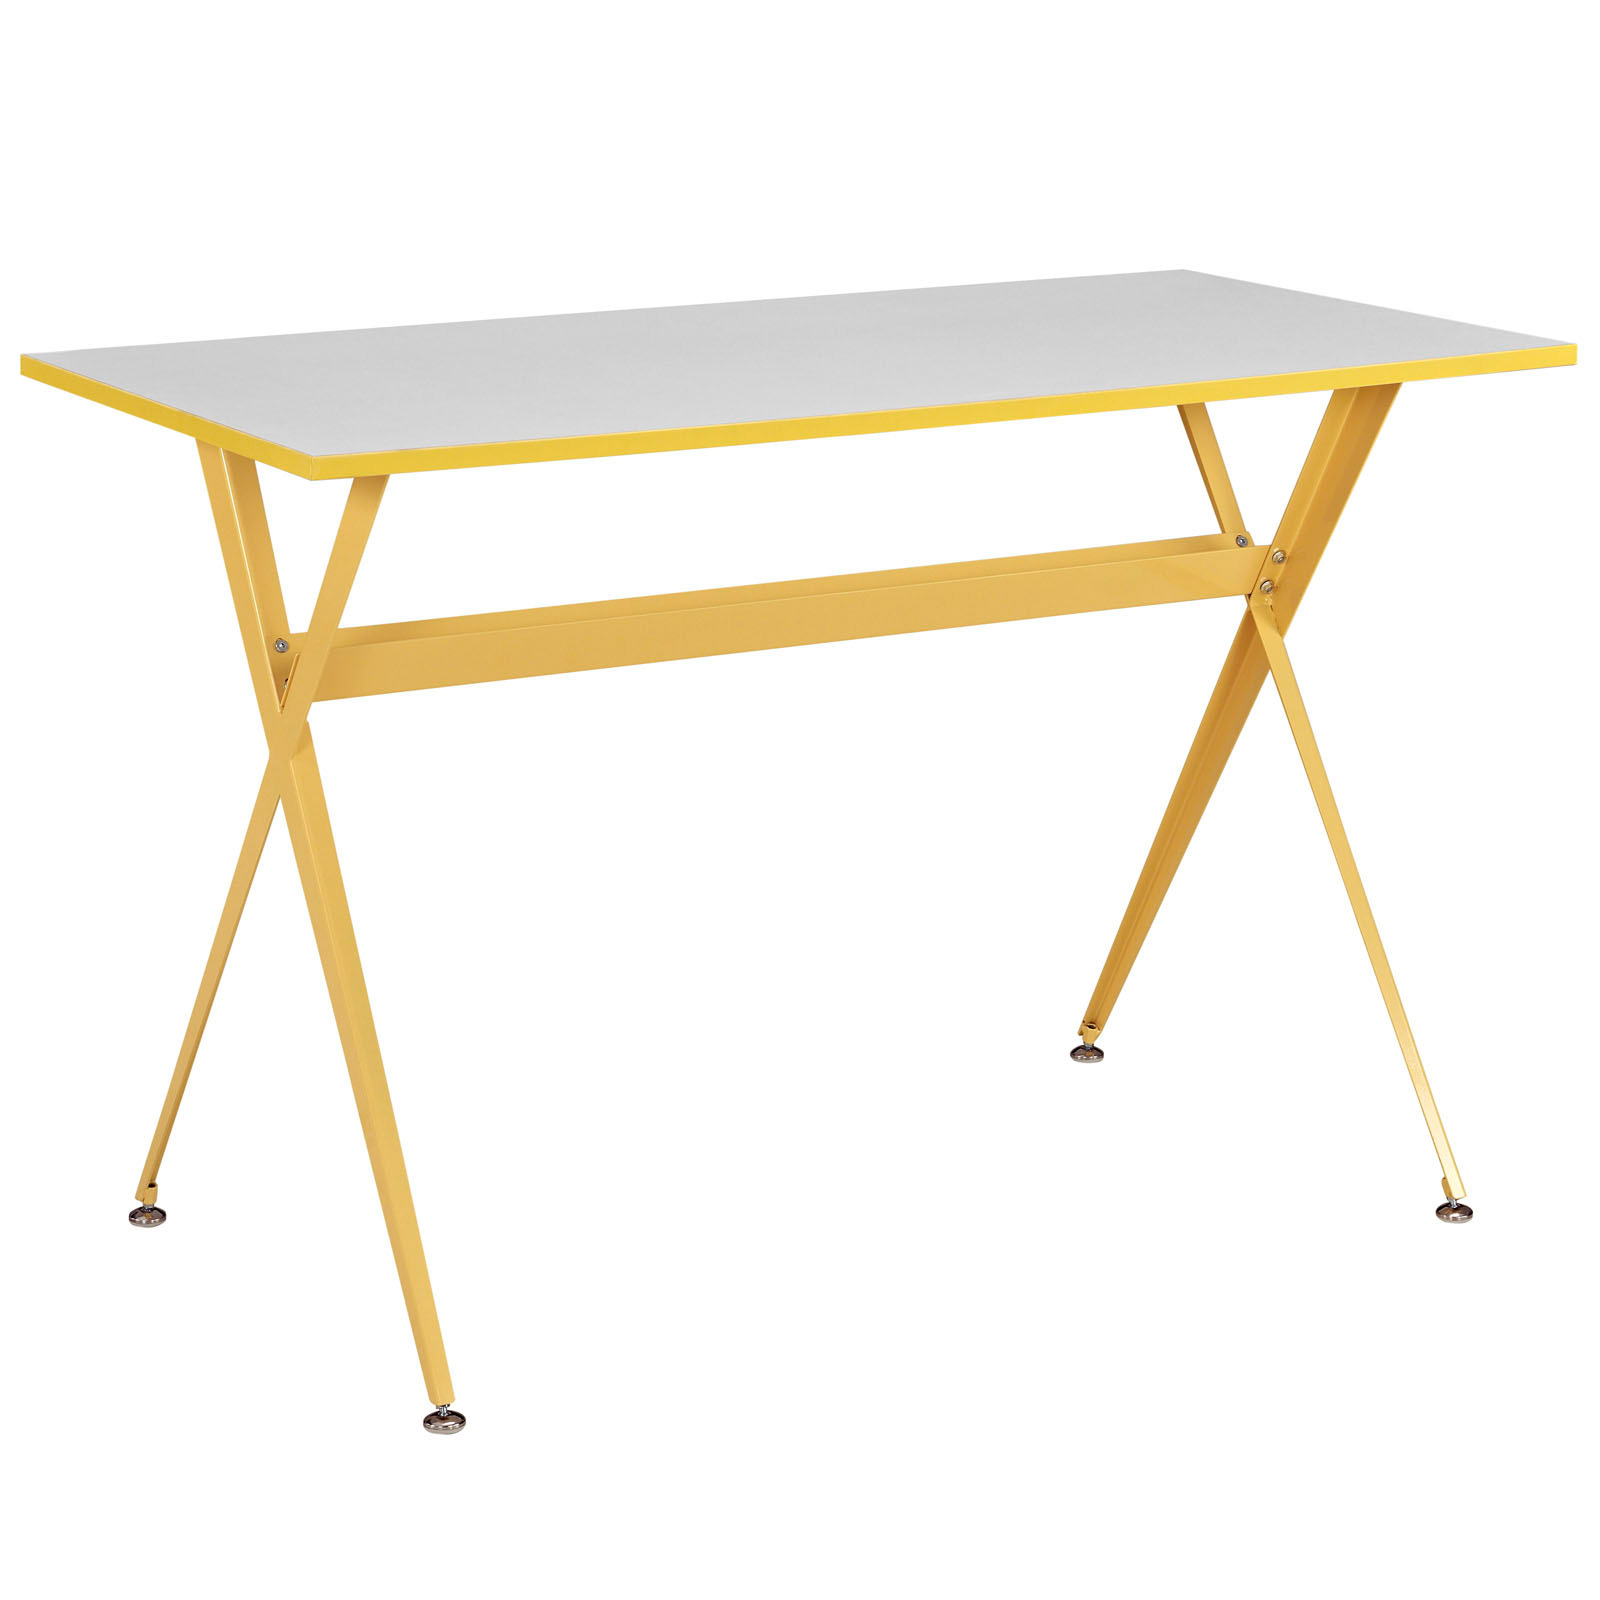 Space saving desk from Modway - Shown in Yellow